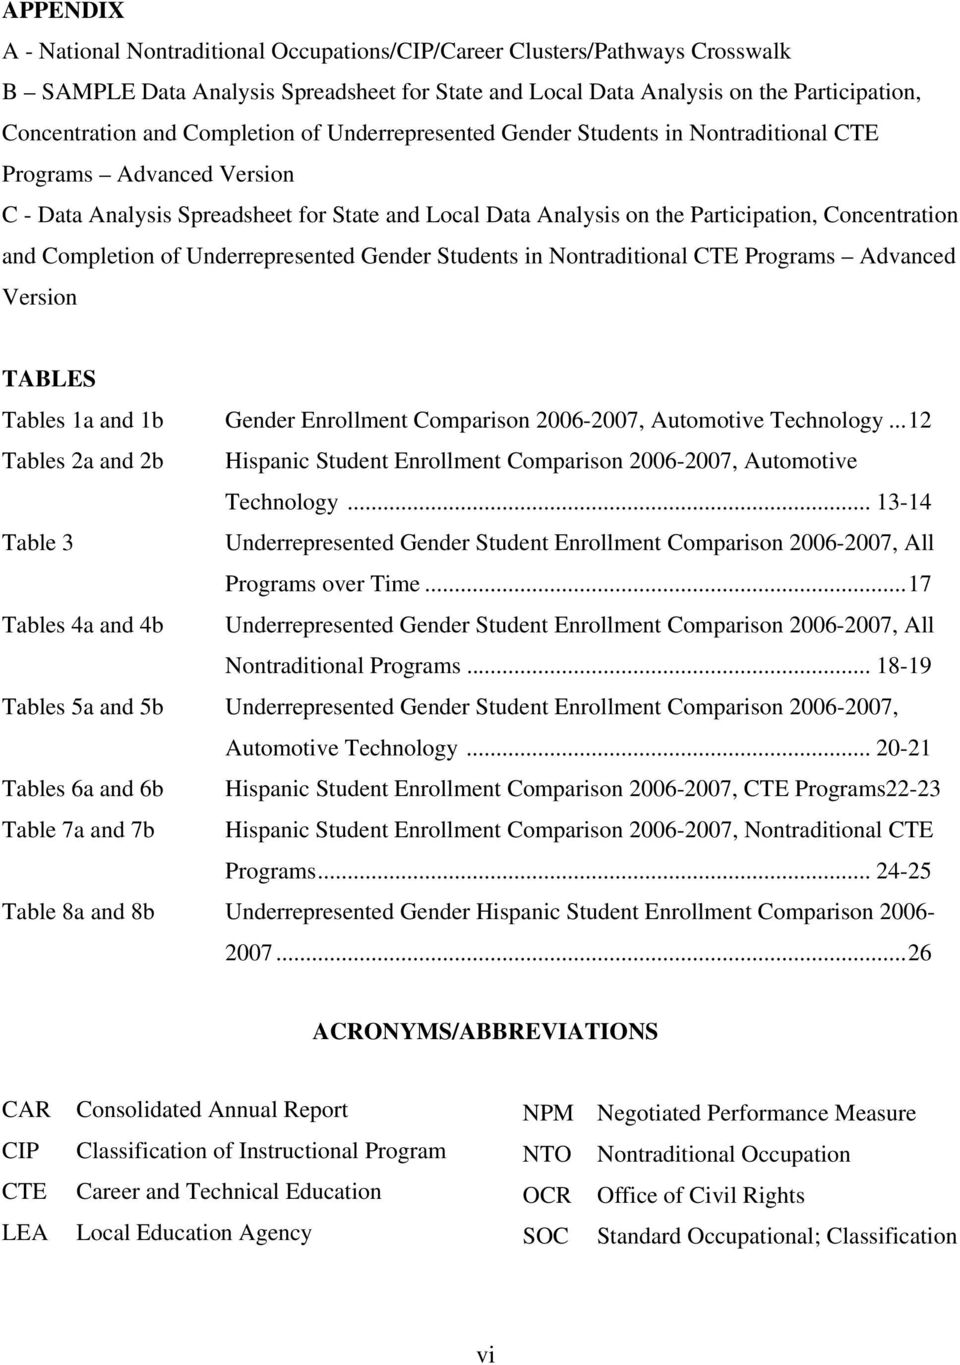 Completion of Underrepresented Gender Students in Nontraditional CTE Programs Advanced Version TABLES Tables 1a and 1b Gender Enrollment Comparison 2006-2007, Automotive Technology.